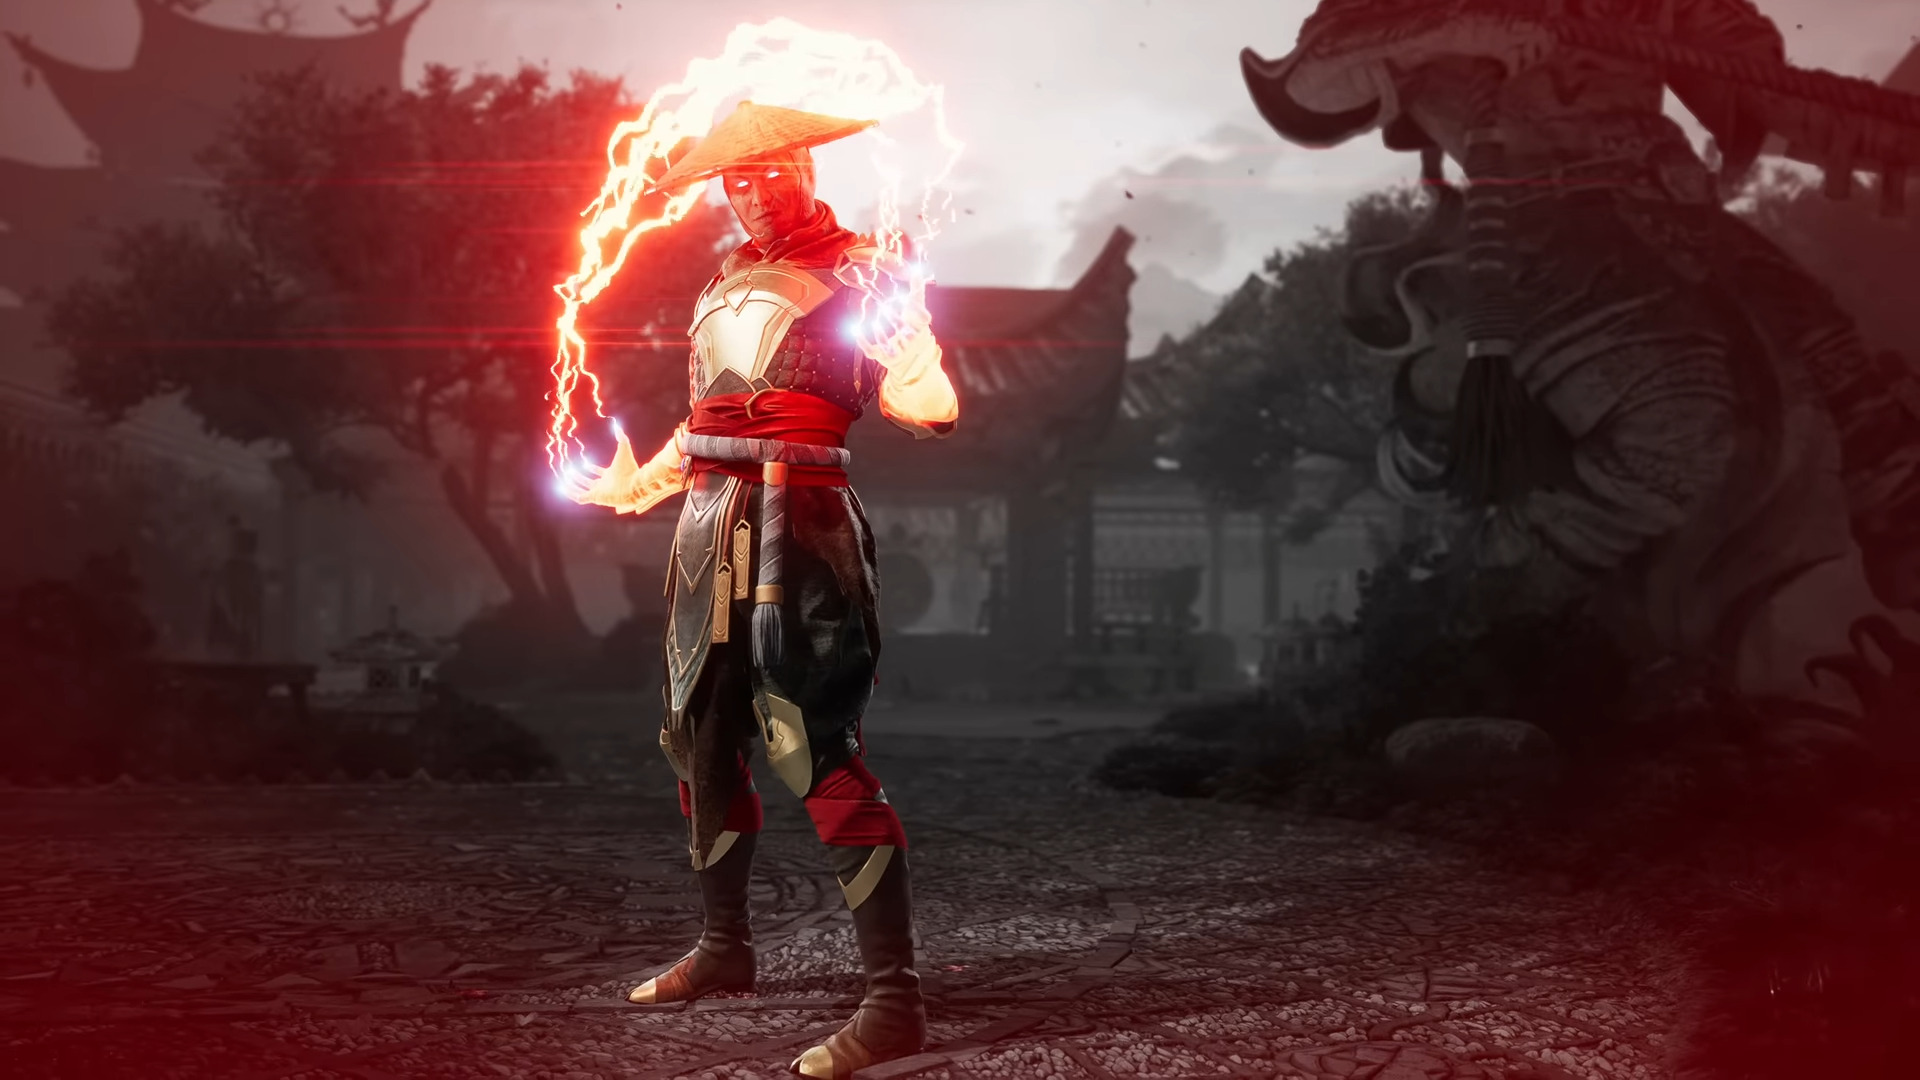 Season 5: "Season of Storms" is now available in Mortal Kombat 1